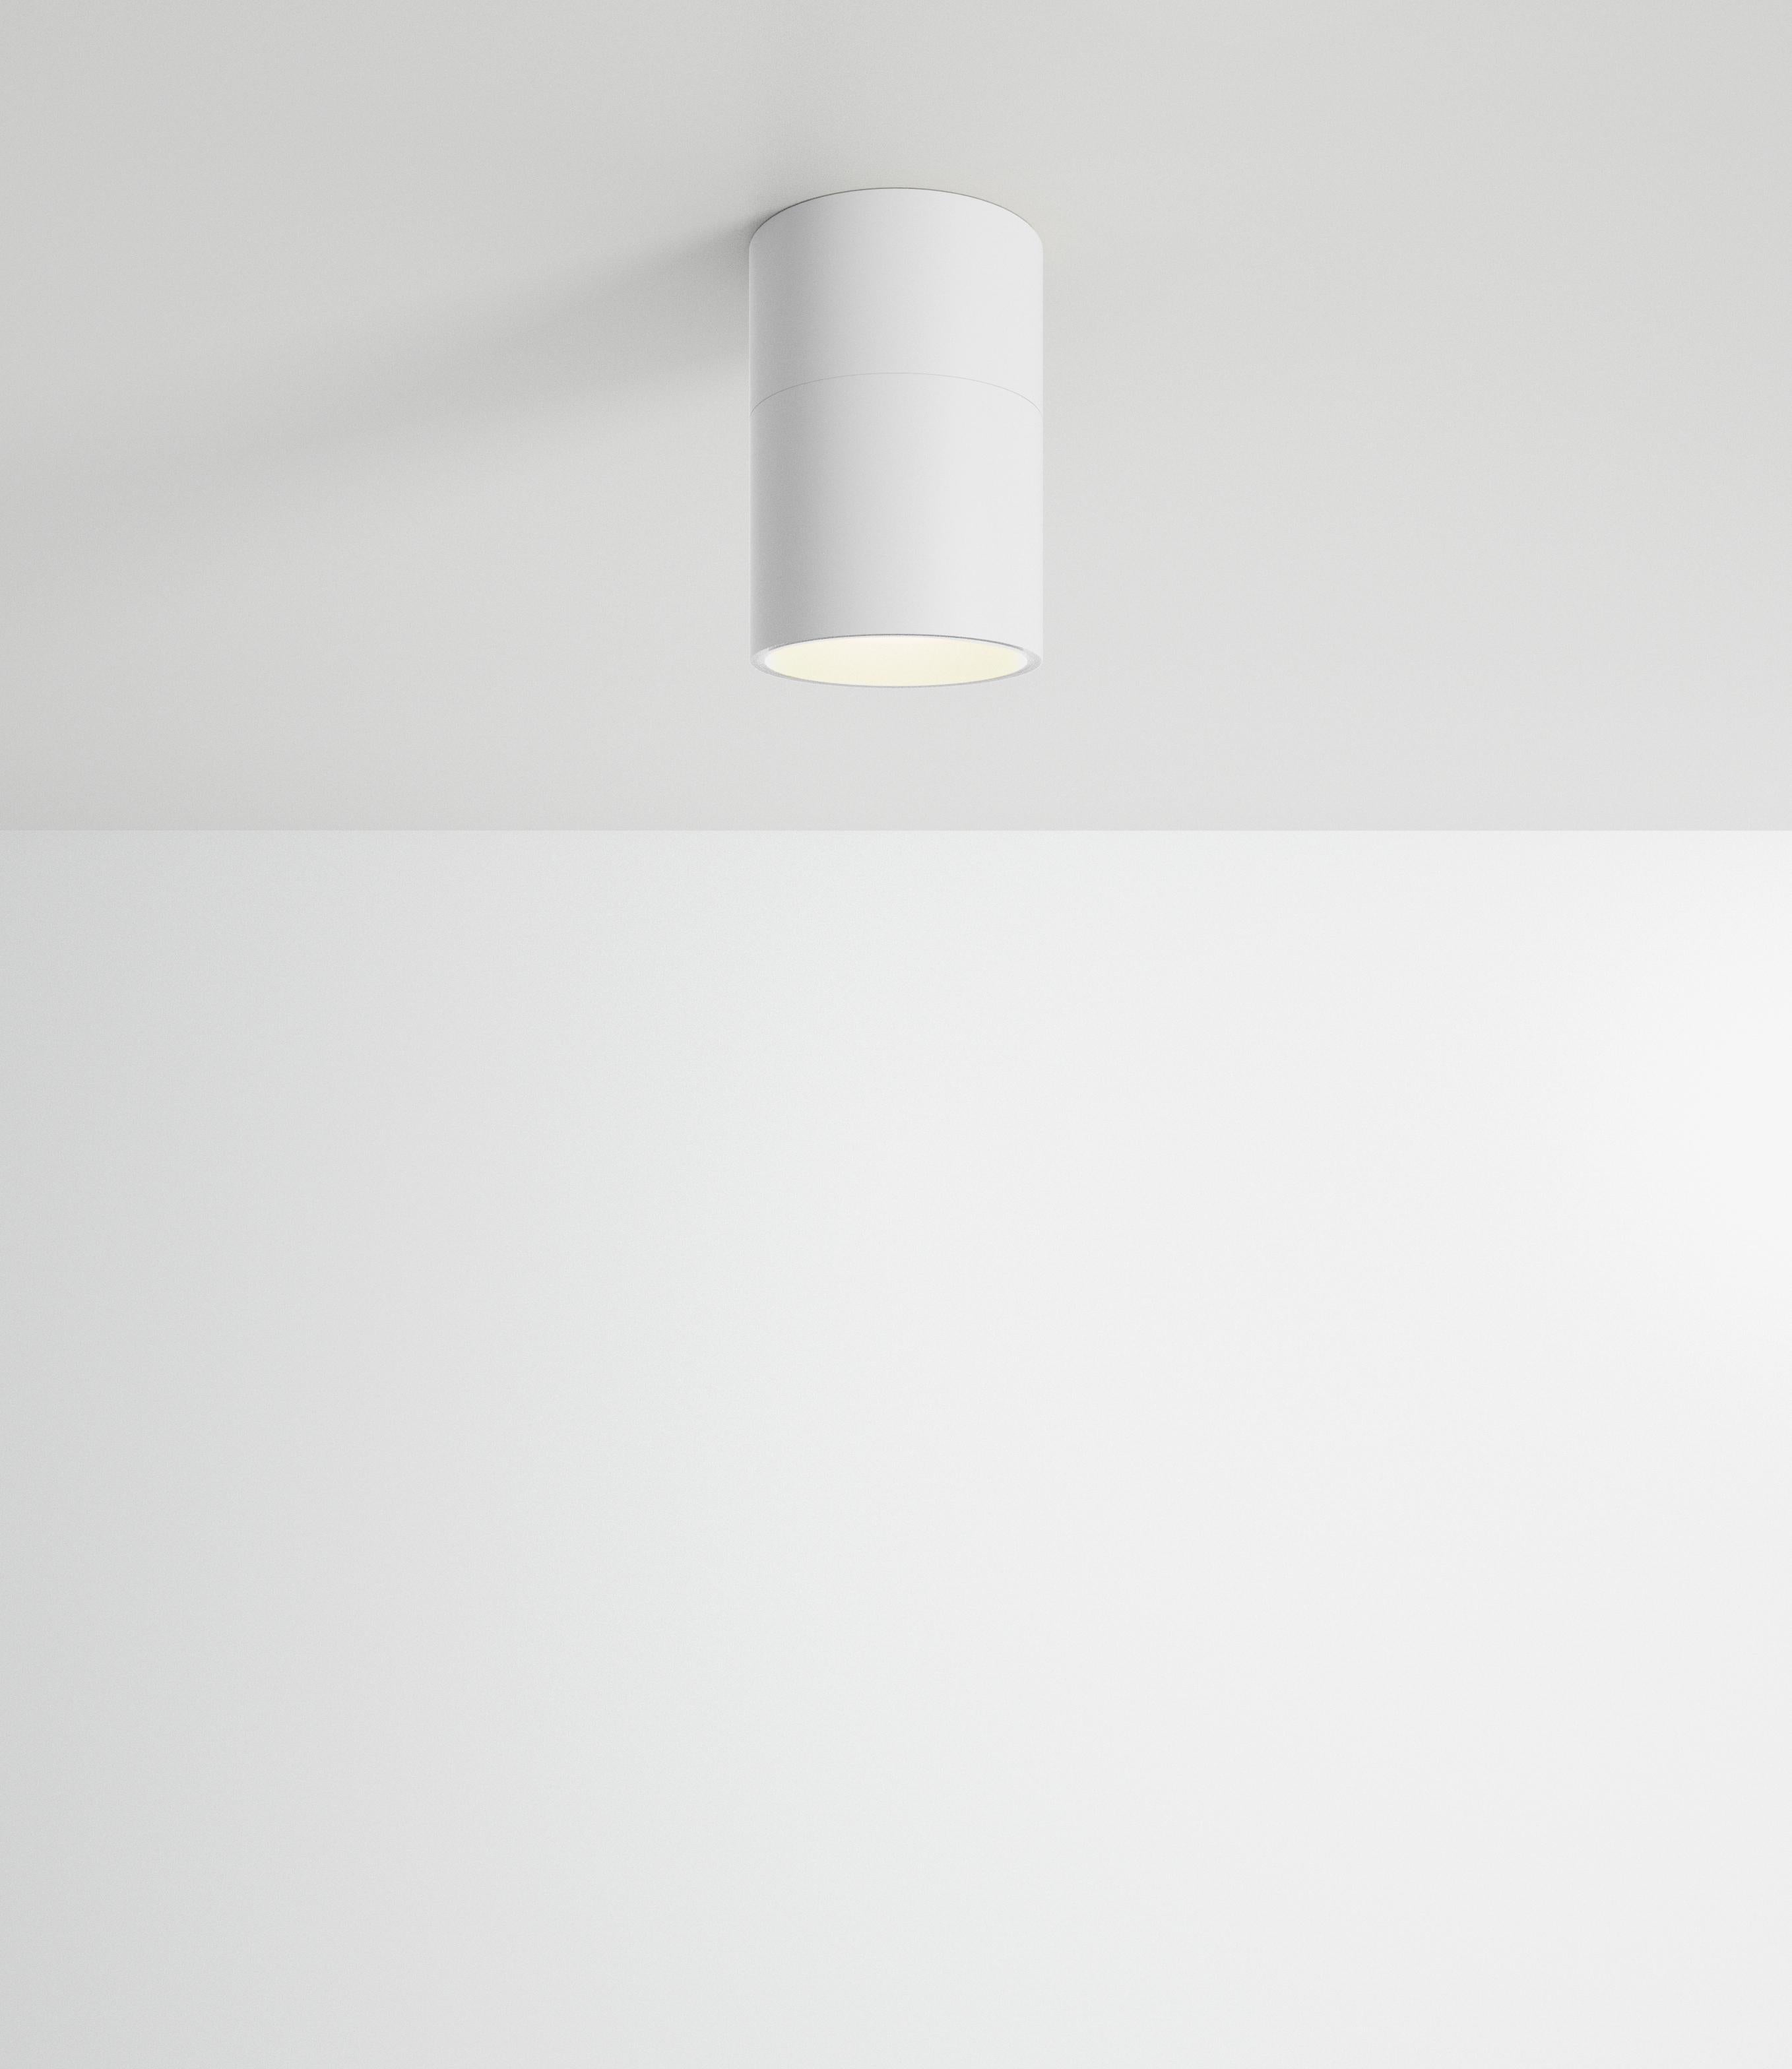 Axolight Small Pivot Ceiling Lamp in White by Ryosuke Fukusada

Single spotlight
The light fixtures have been designed to ensure a high visual comfort. The constant current LED chip and its lens are hosted in a recessed position inside the cylinder.